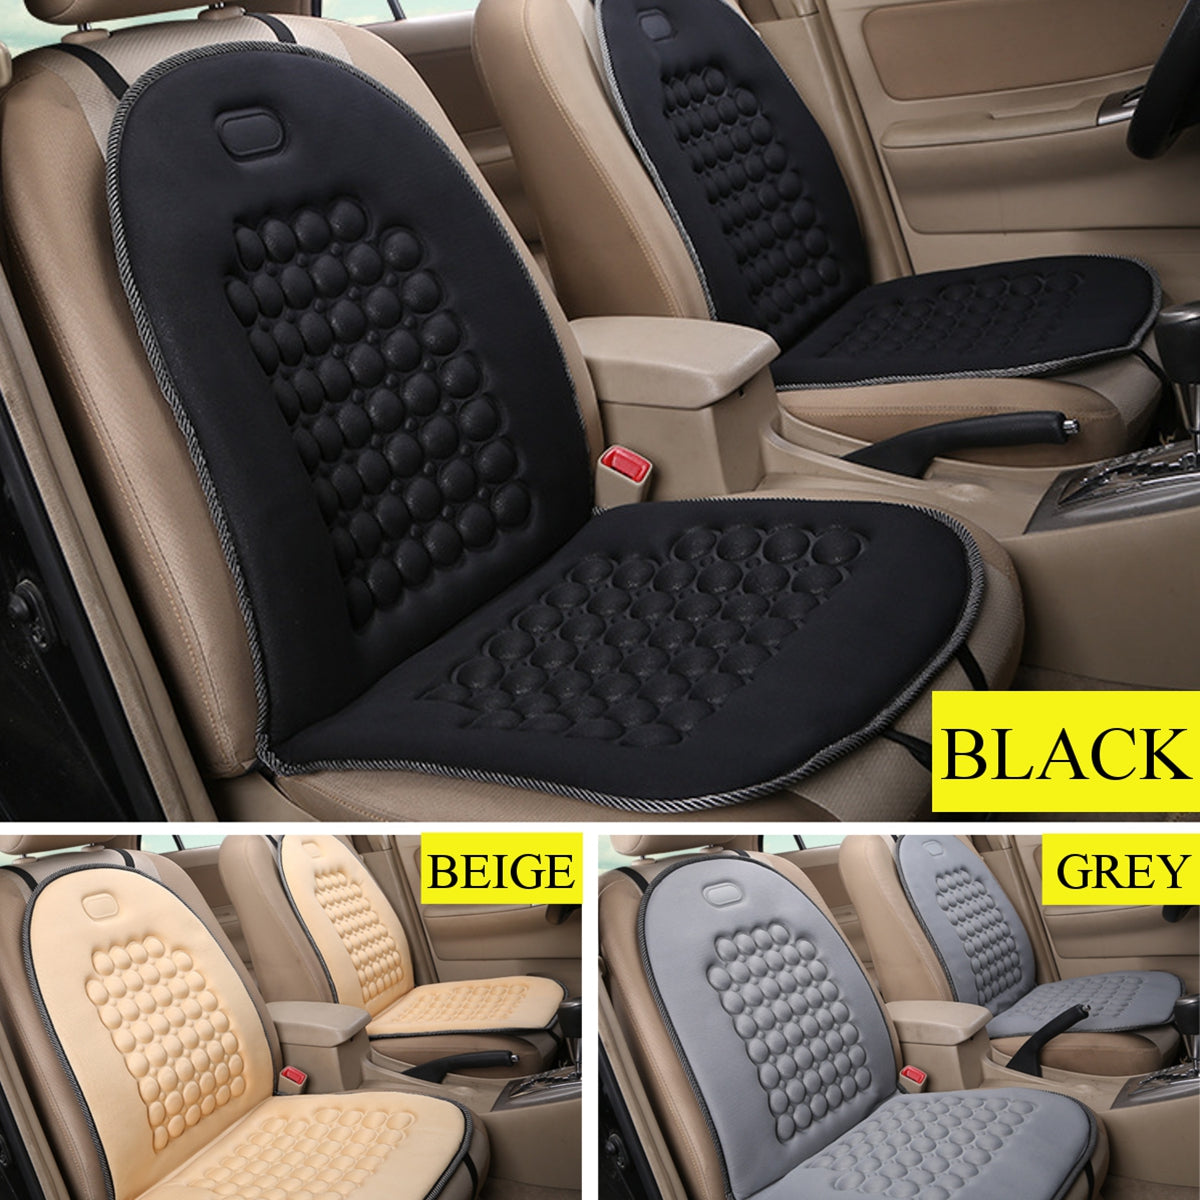 Black Universal Breathable Fabric Seat Cover Mat Comfortable Cushion For Car Van Truck Office Home